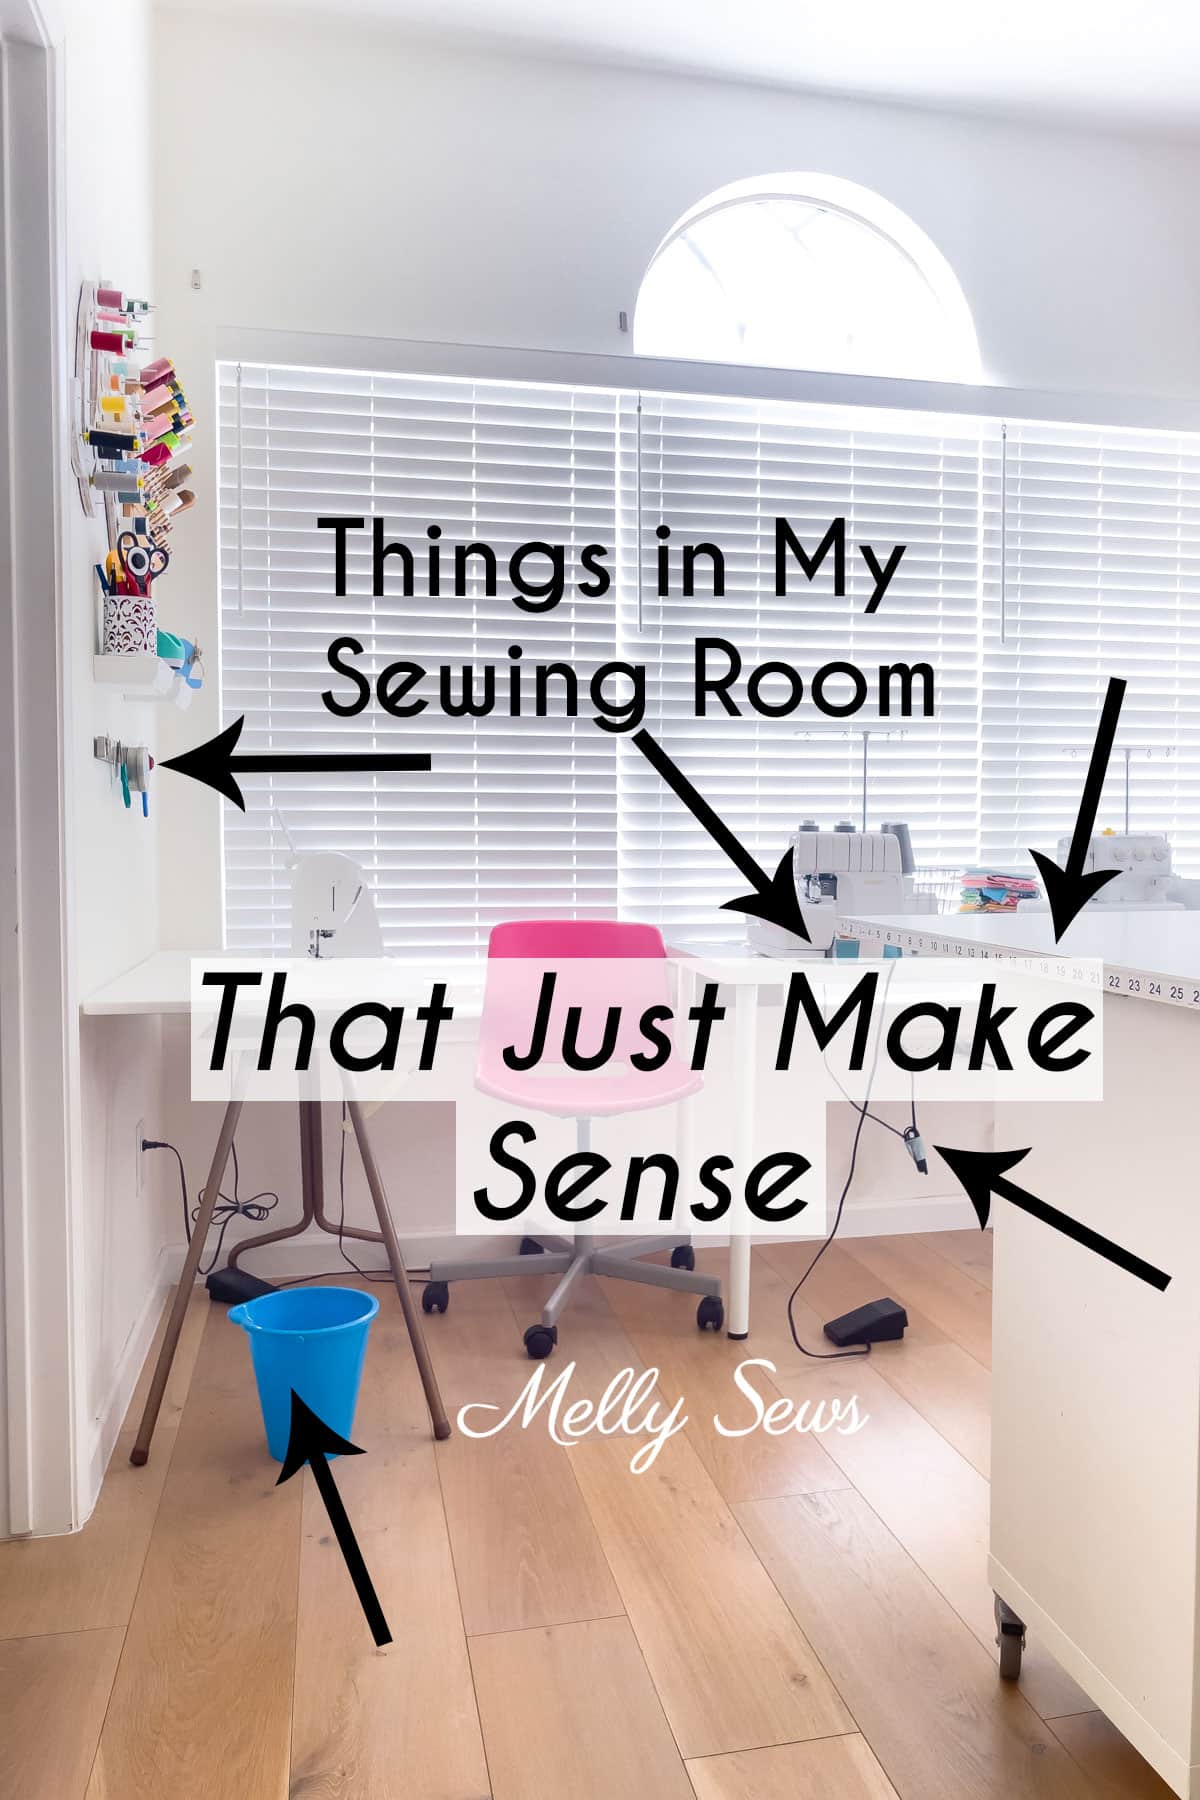 Gifts to Sew - 10 Quick Makes - Melly Sews